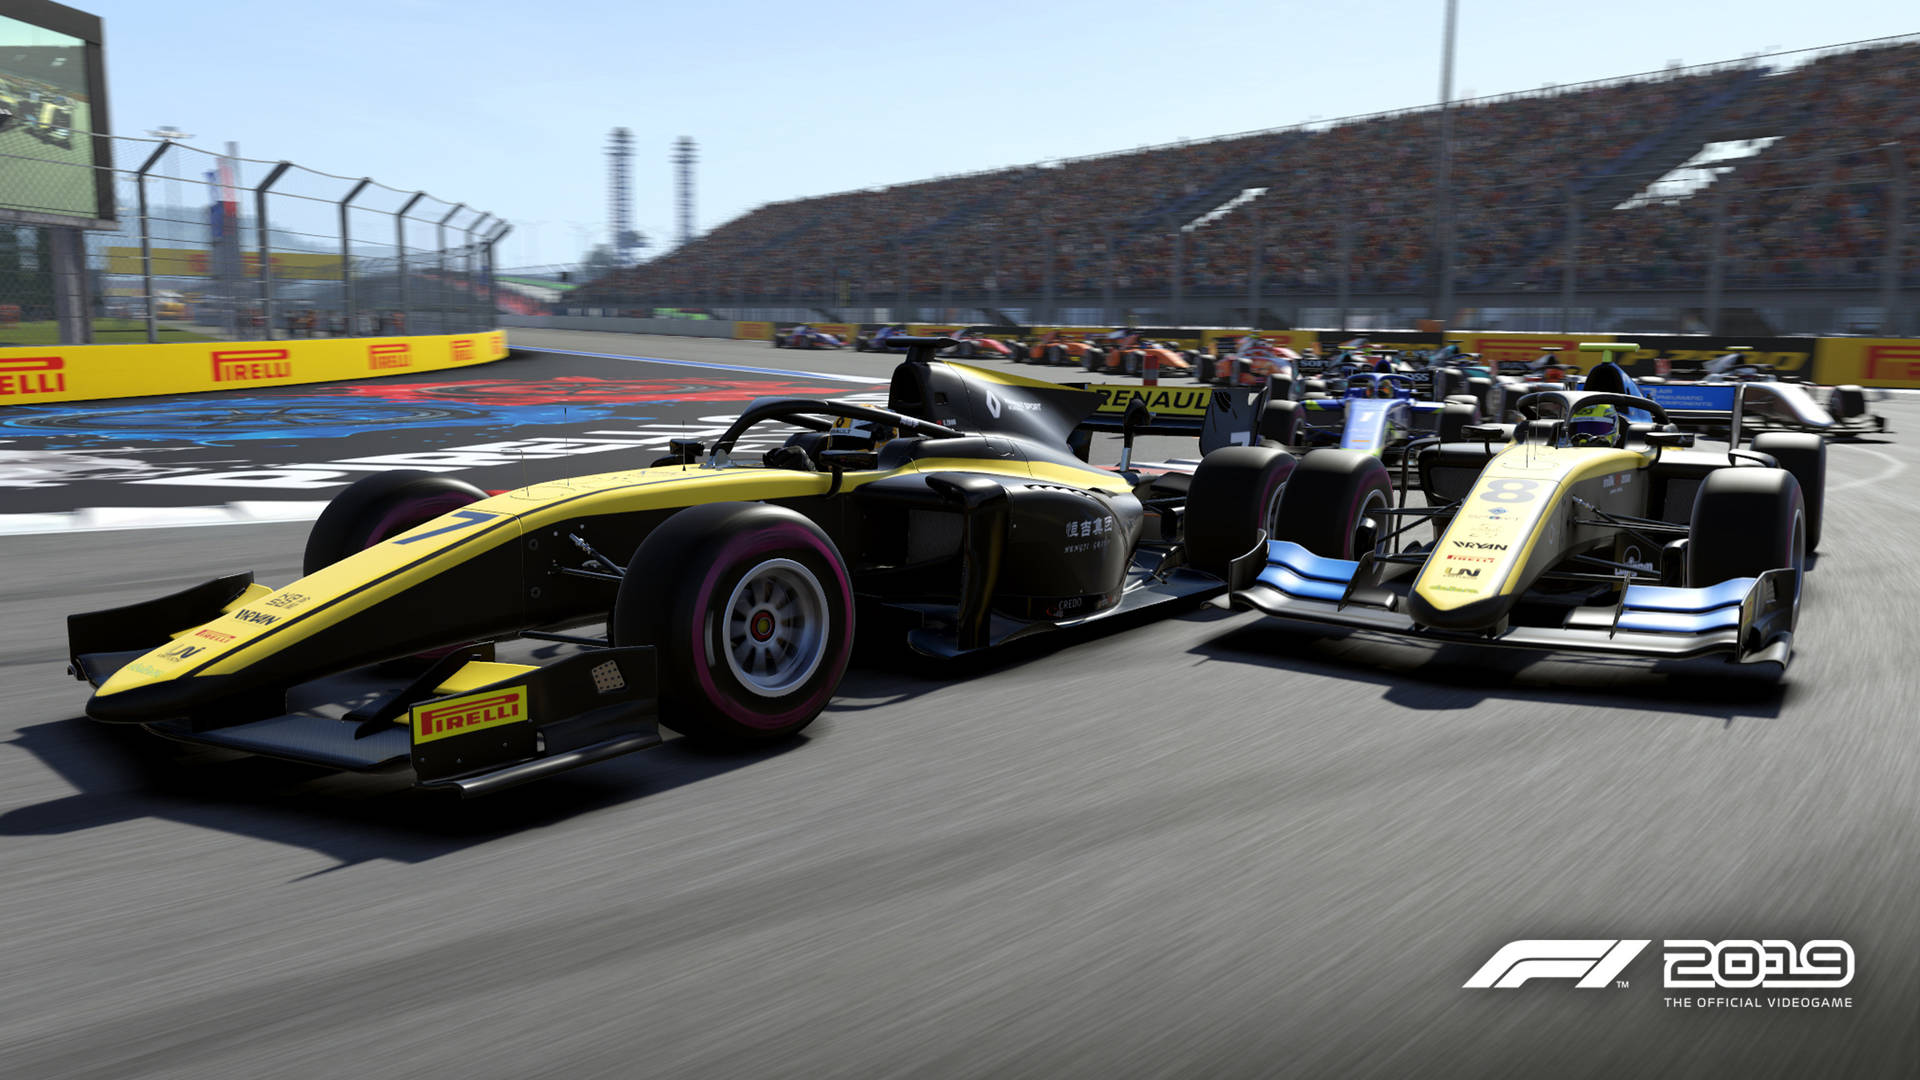 Mid-race Shot In F1 2019 Background